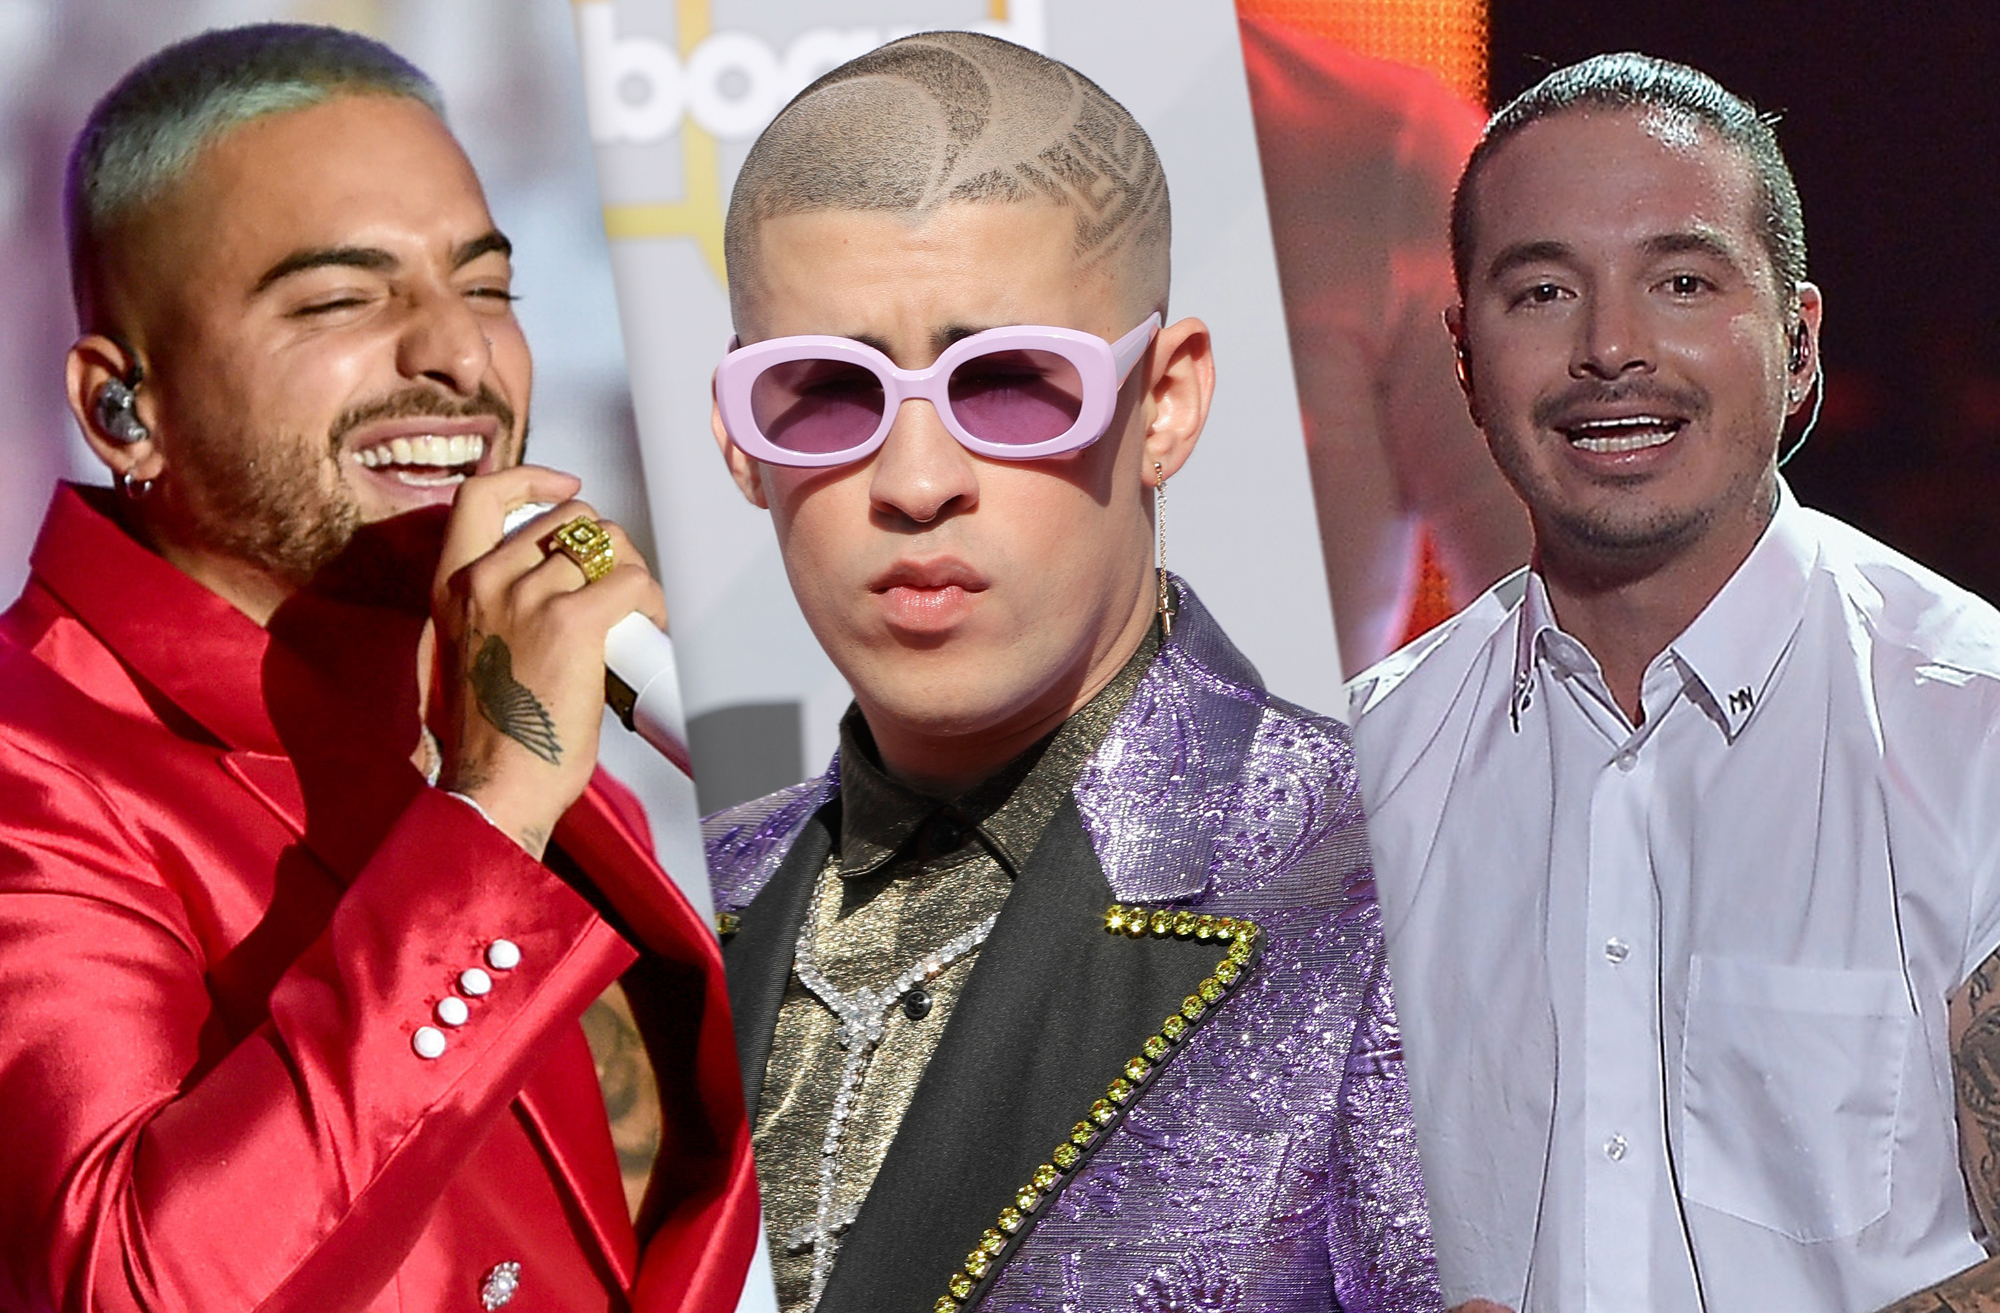 Maluma, Bad Bunny and J Balvin were some of the most nominated